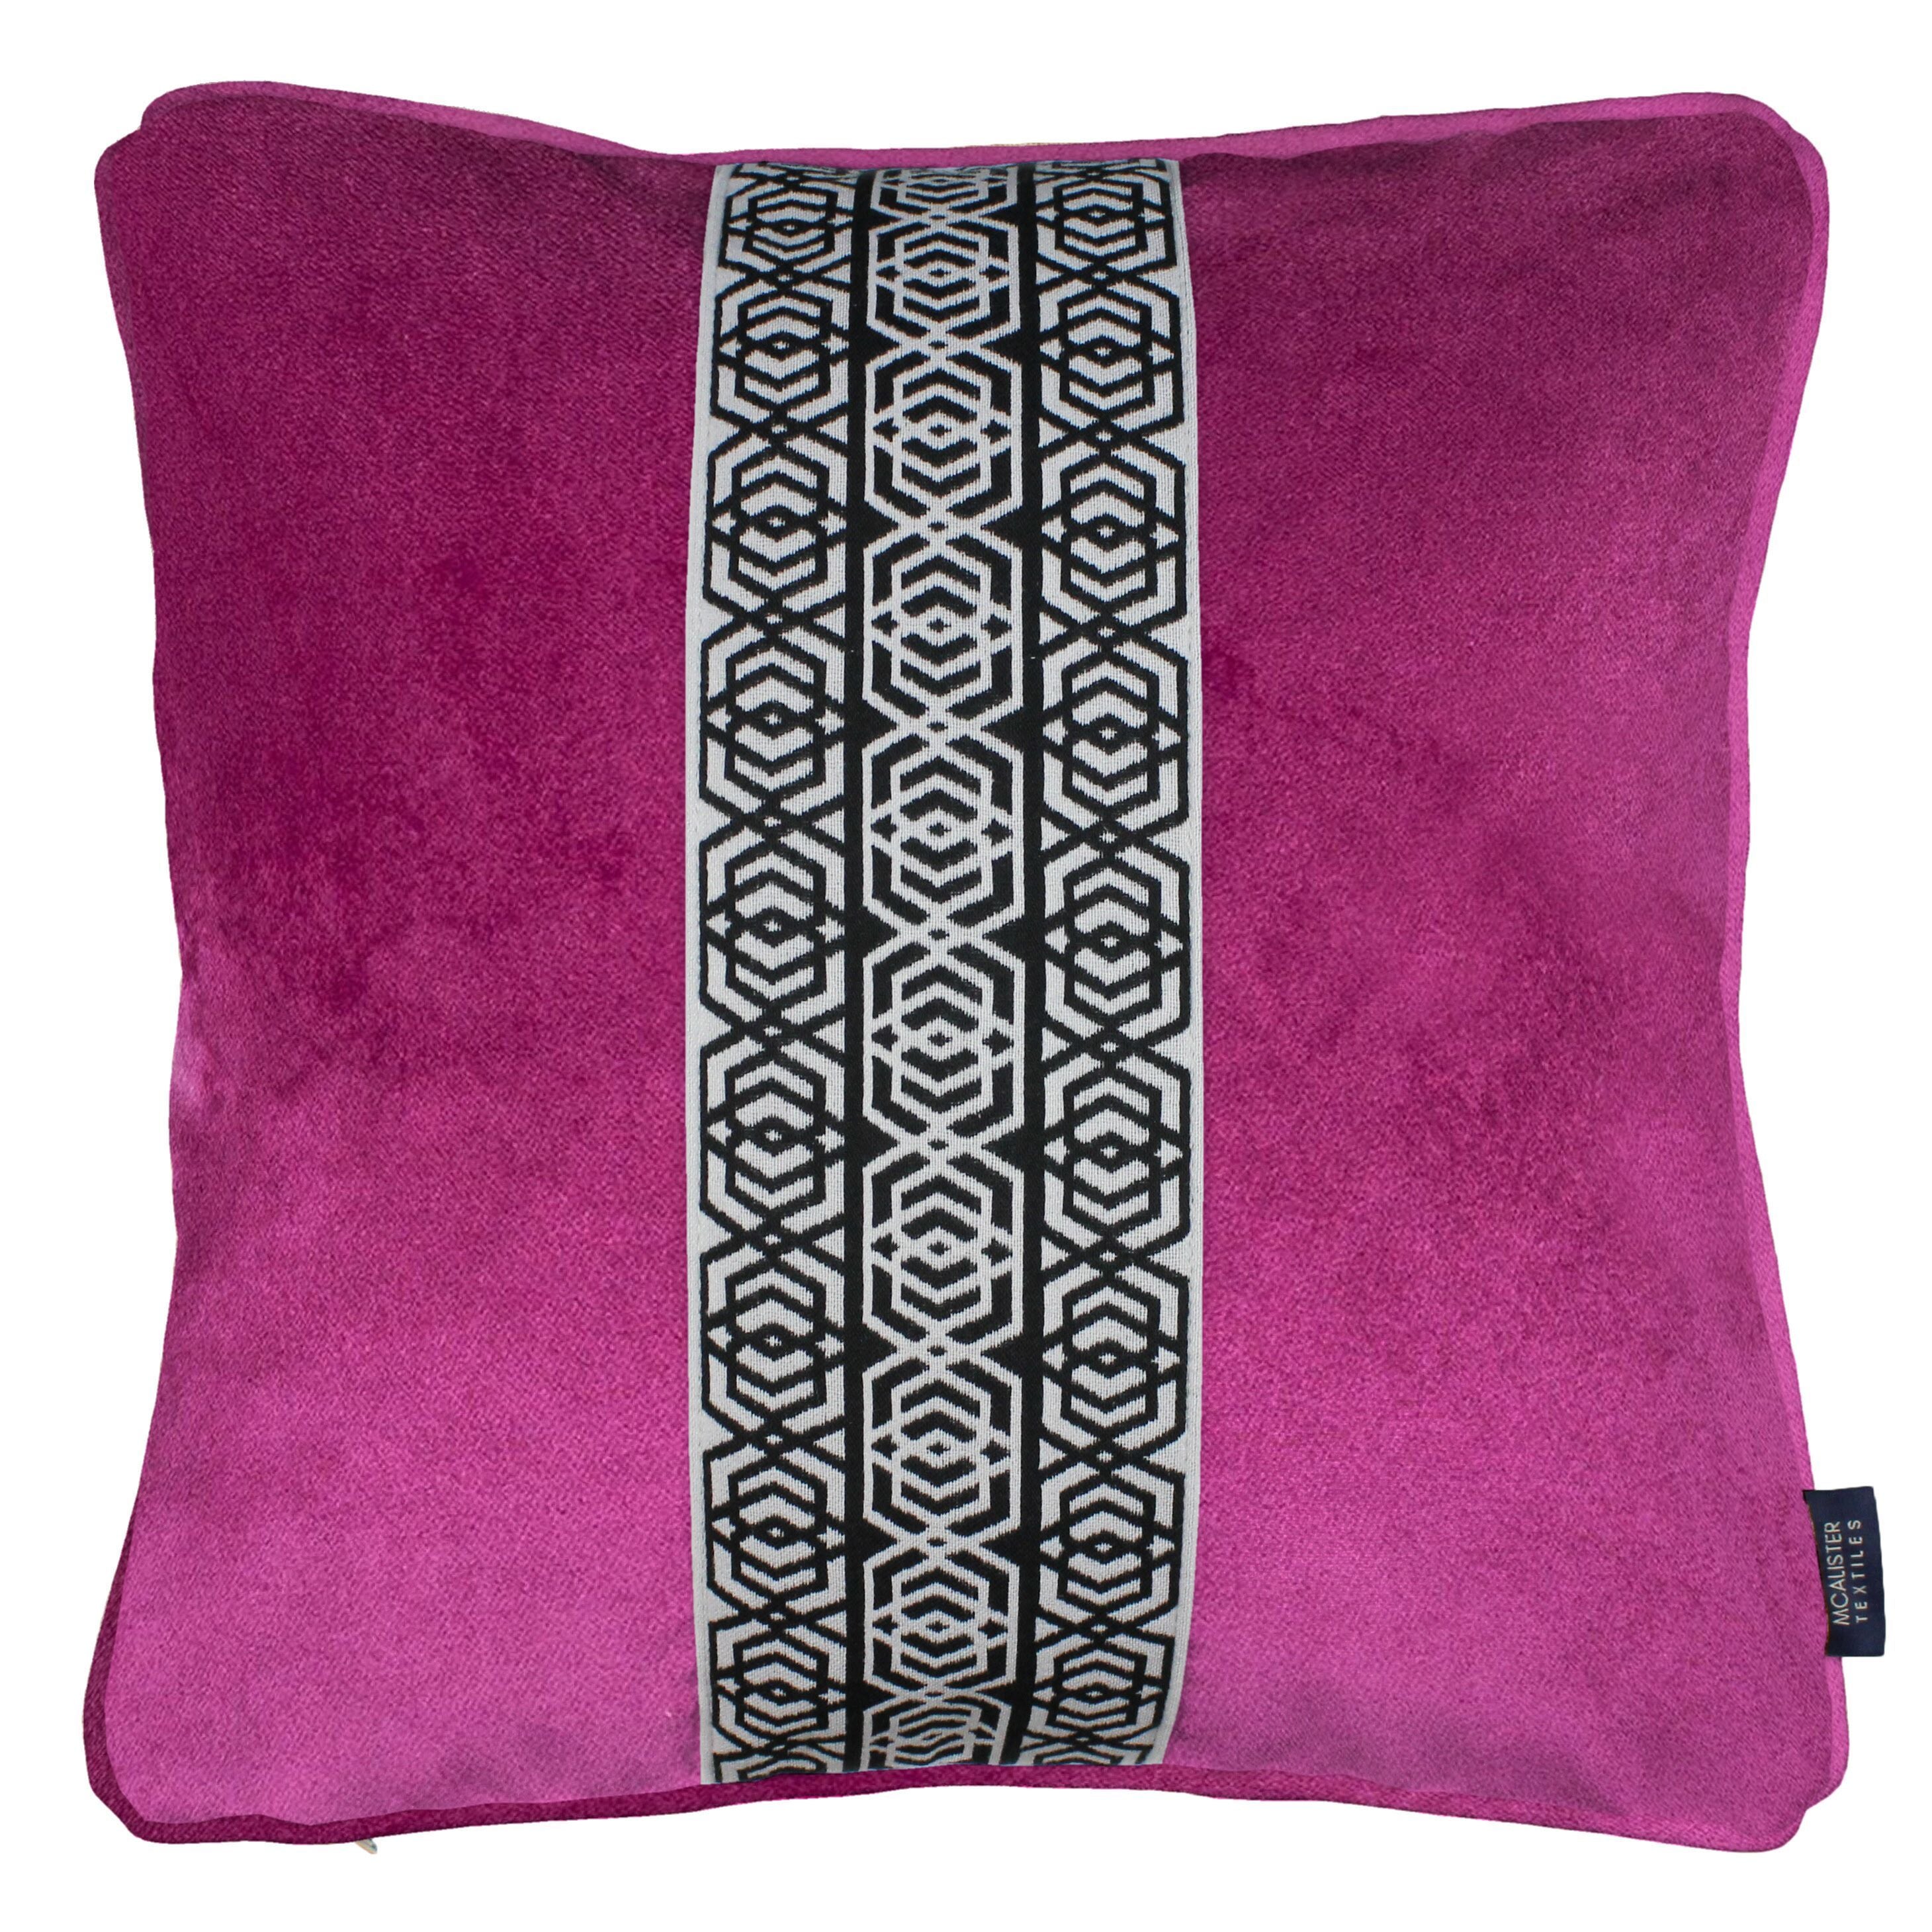 McAlister Textiles Coba Striped Fuchsia Pink Velvet Cushion Cushions and Covers Polyester Filler 43cm x 43cm 